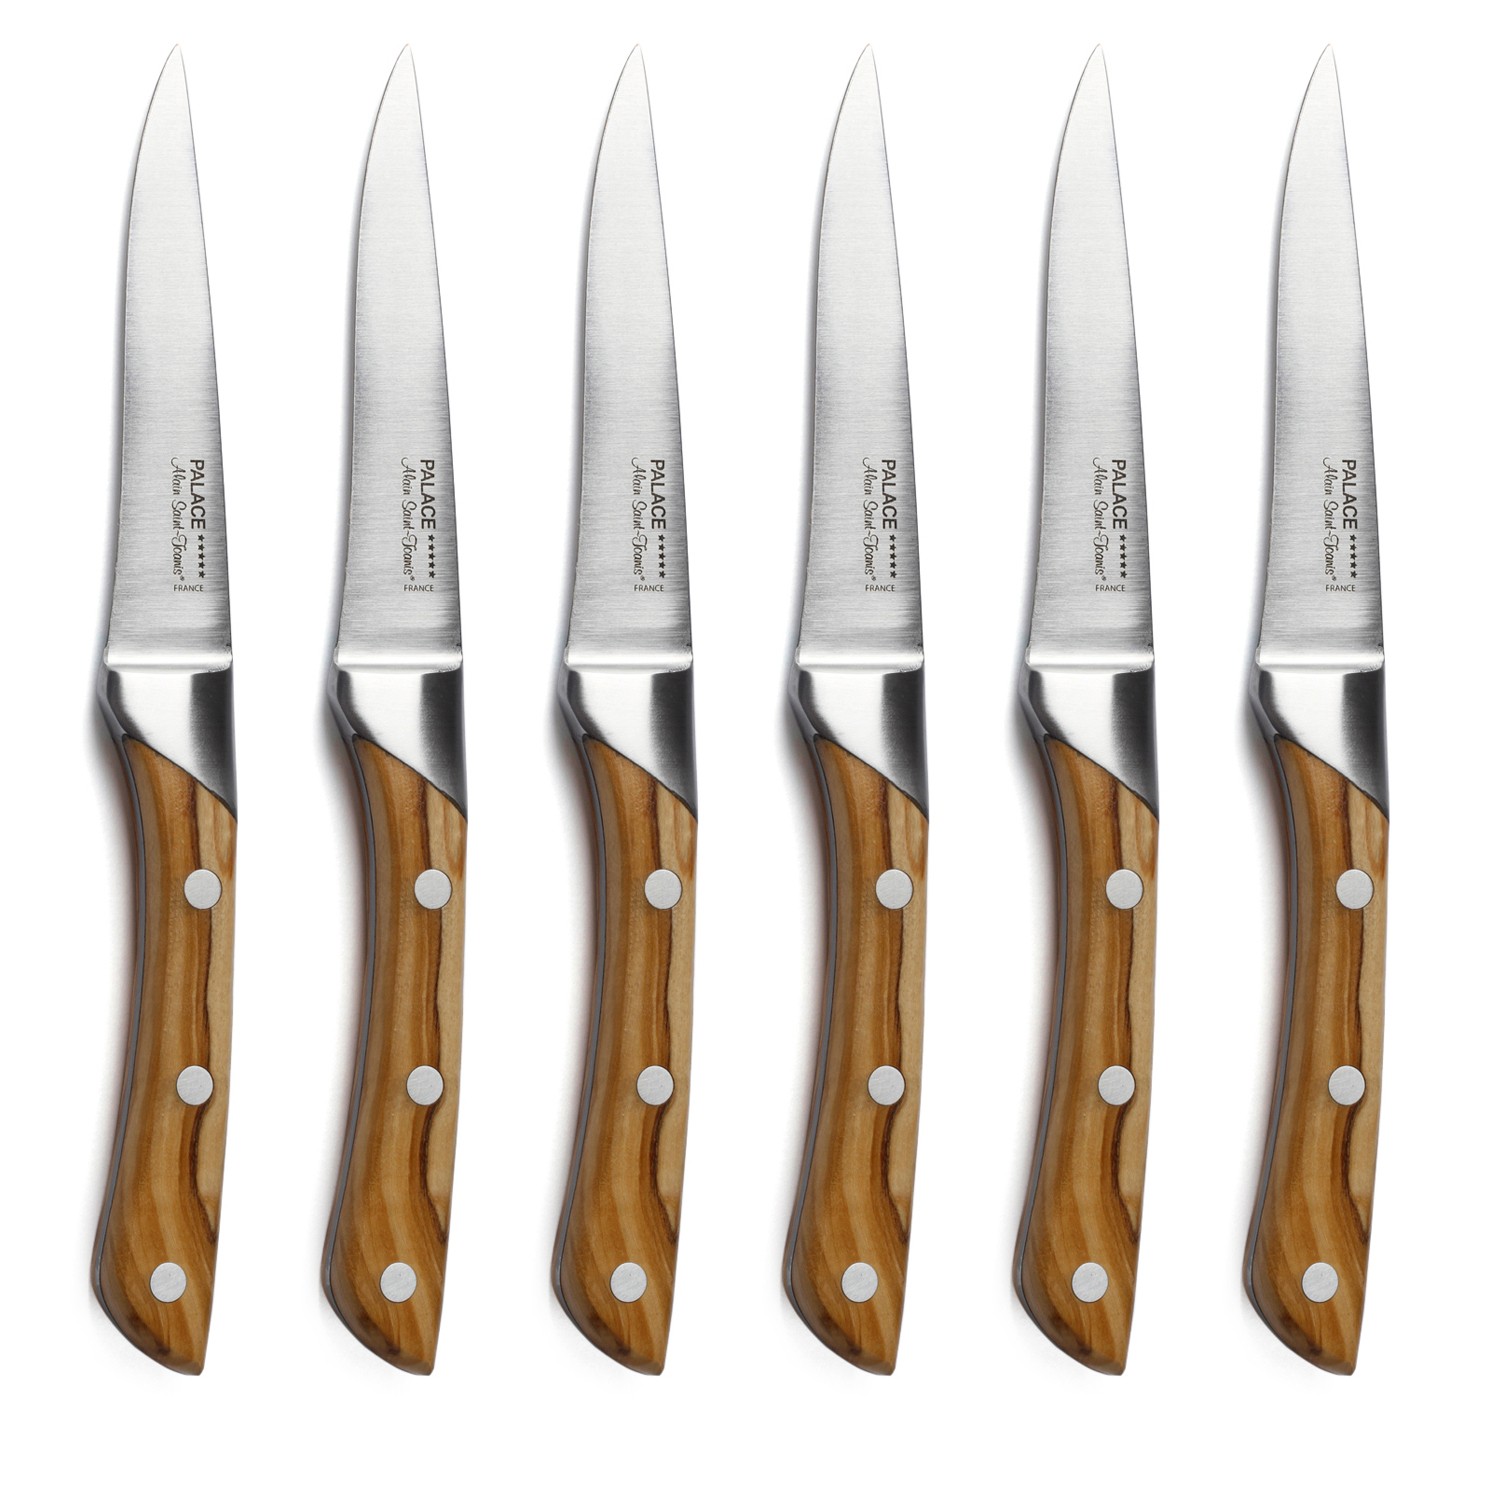 Alain Saint Joanis | Palace Steak Knives / Olivewood - Set 6 in Deluxe Box Olive by FX Dougherty Home & Gift